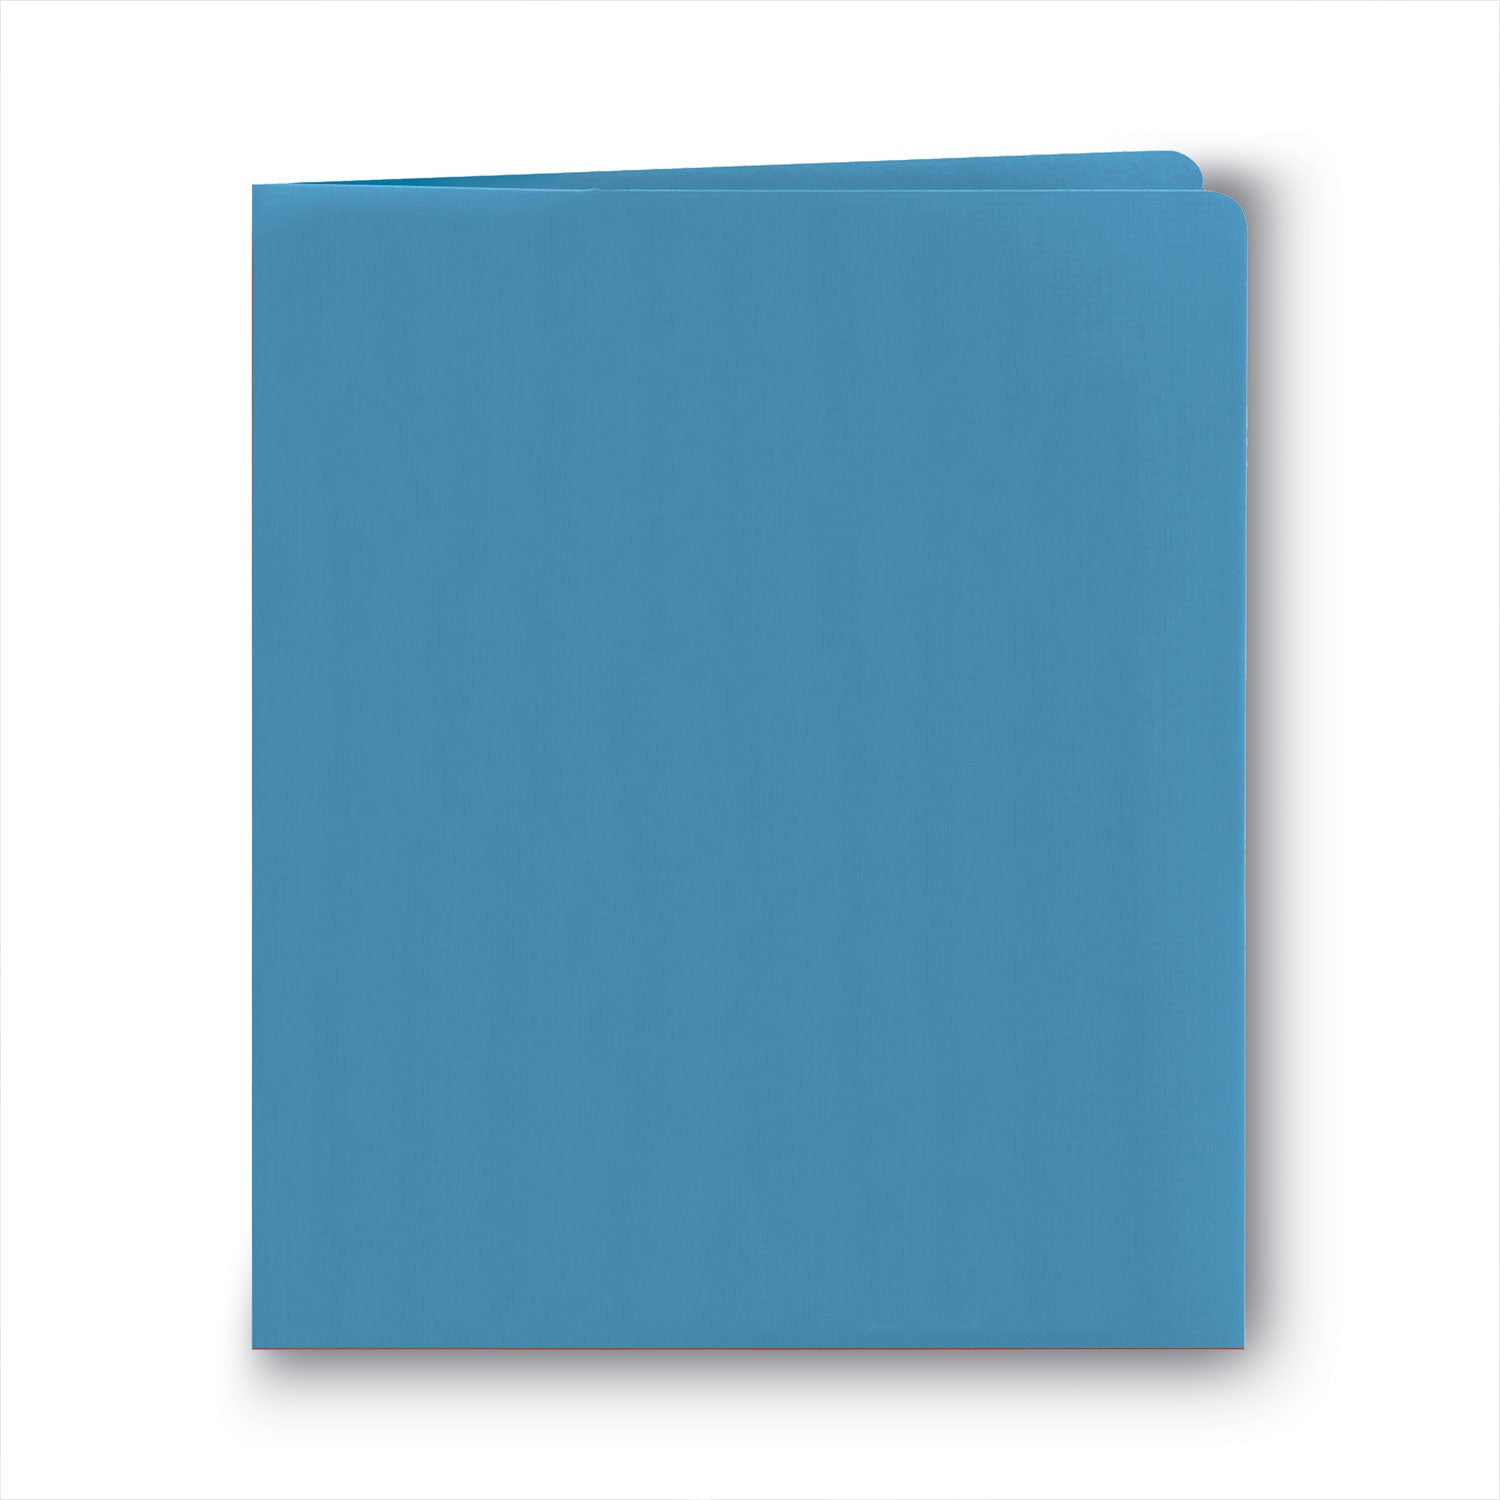 Two-Pocket Folder, Textured Paper, 100-Sheet Capacity, 11 x 8.5, Assorted, 25/Box - 